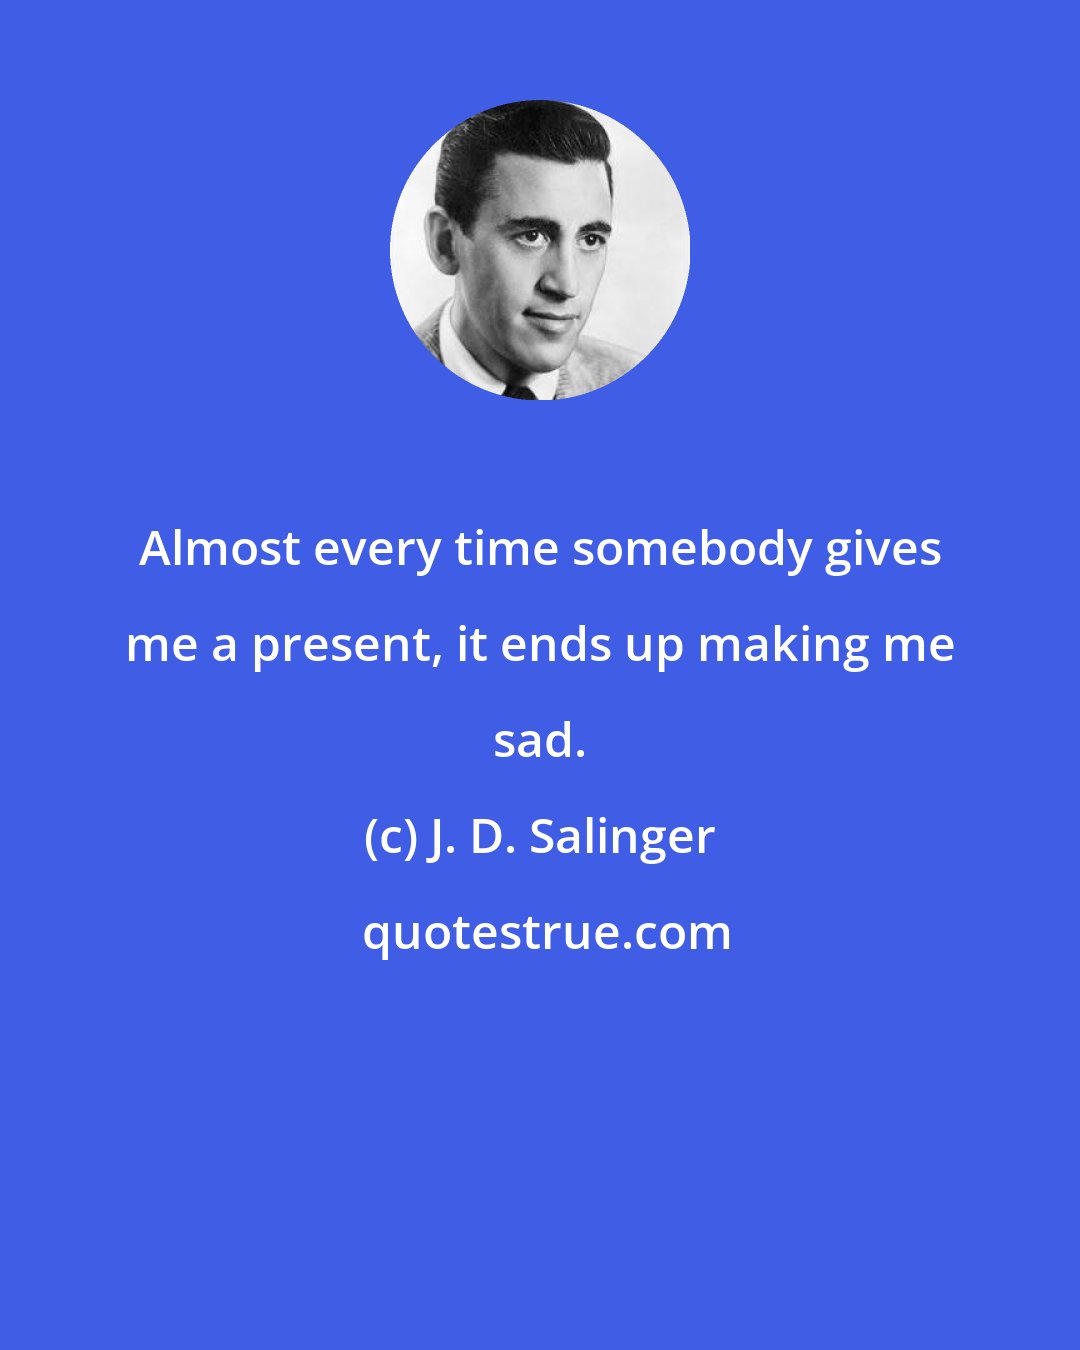 J. D. Salinger: Almost every time somebody gives me a present, it ends up making me sad.